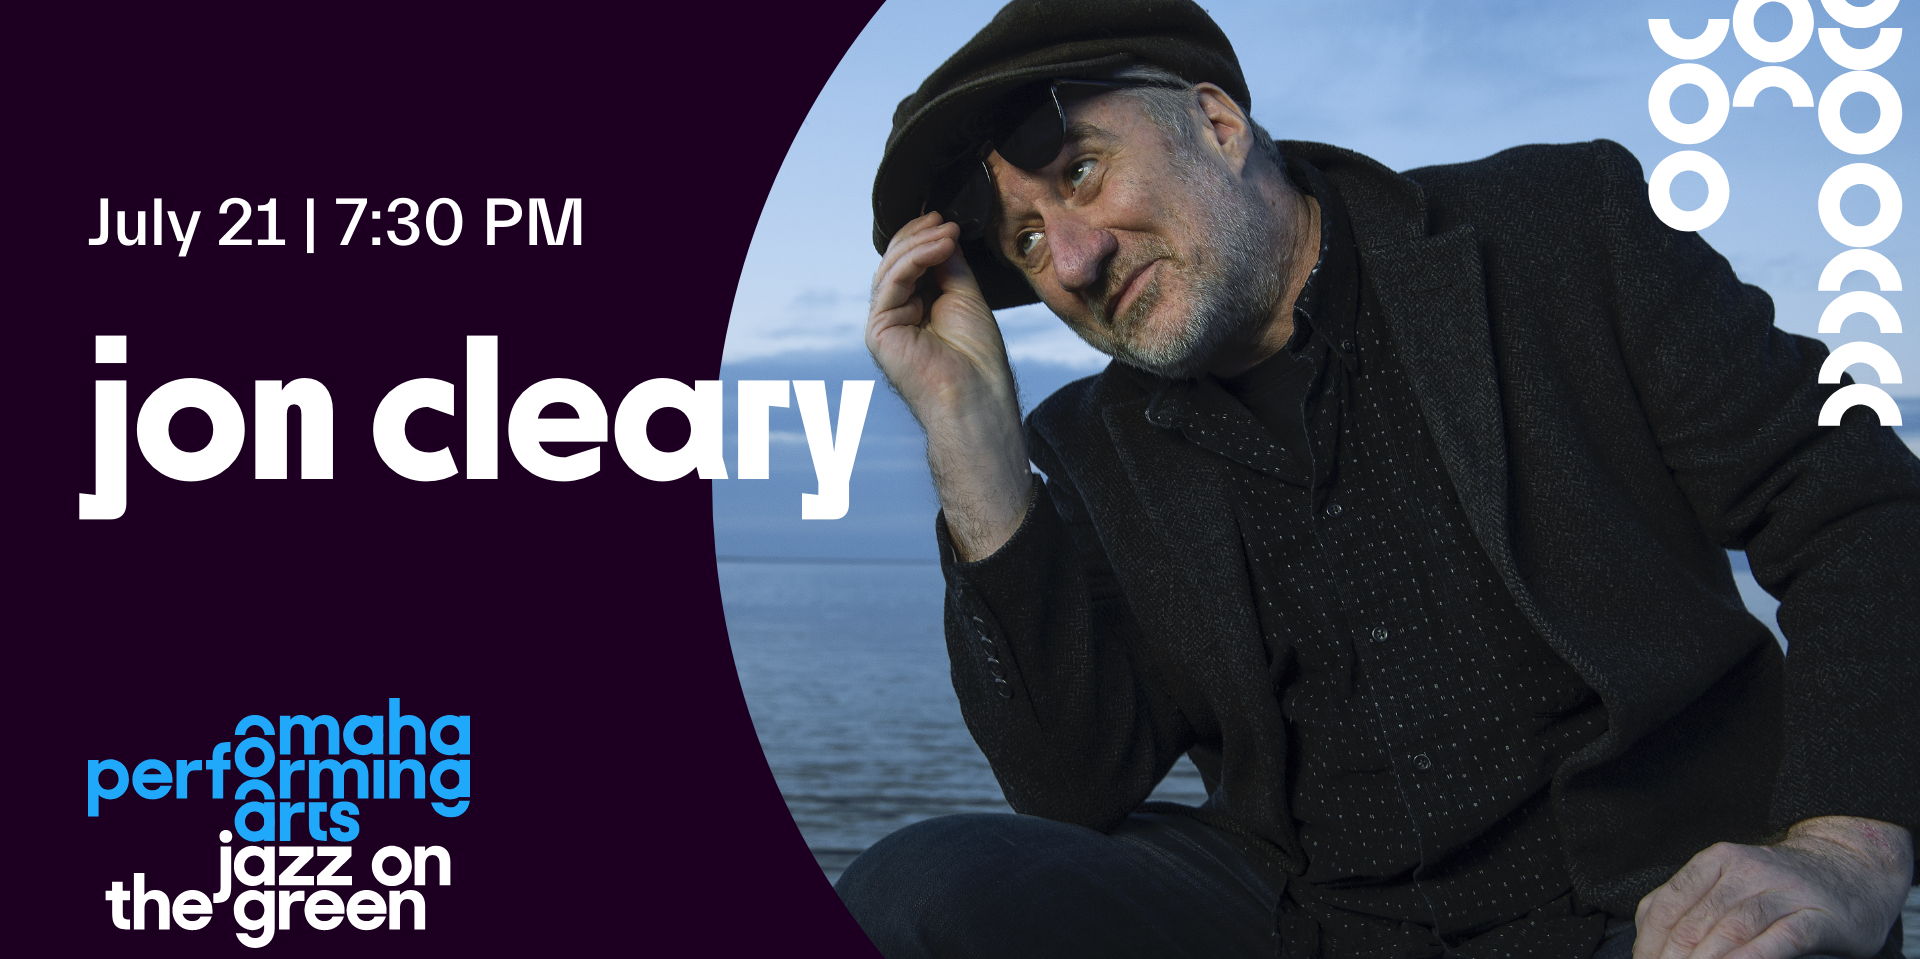 Jon Cleary promotional image